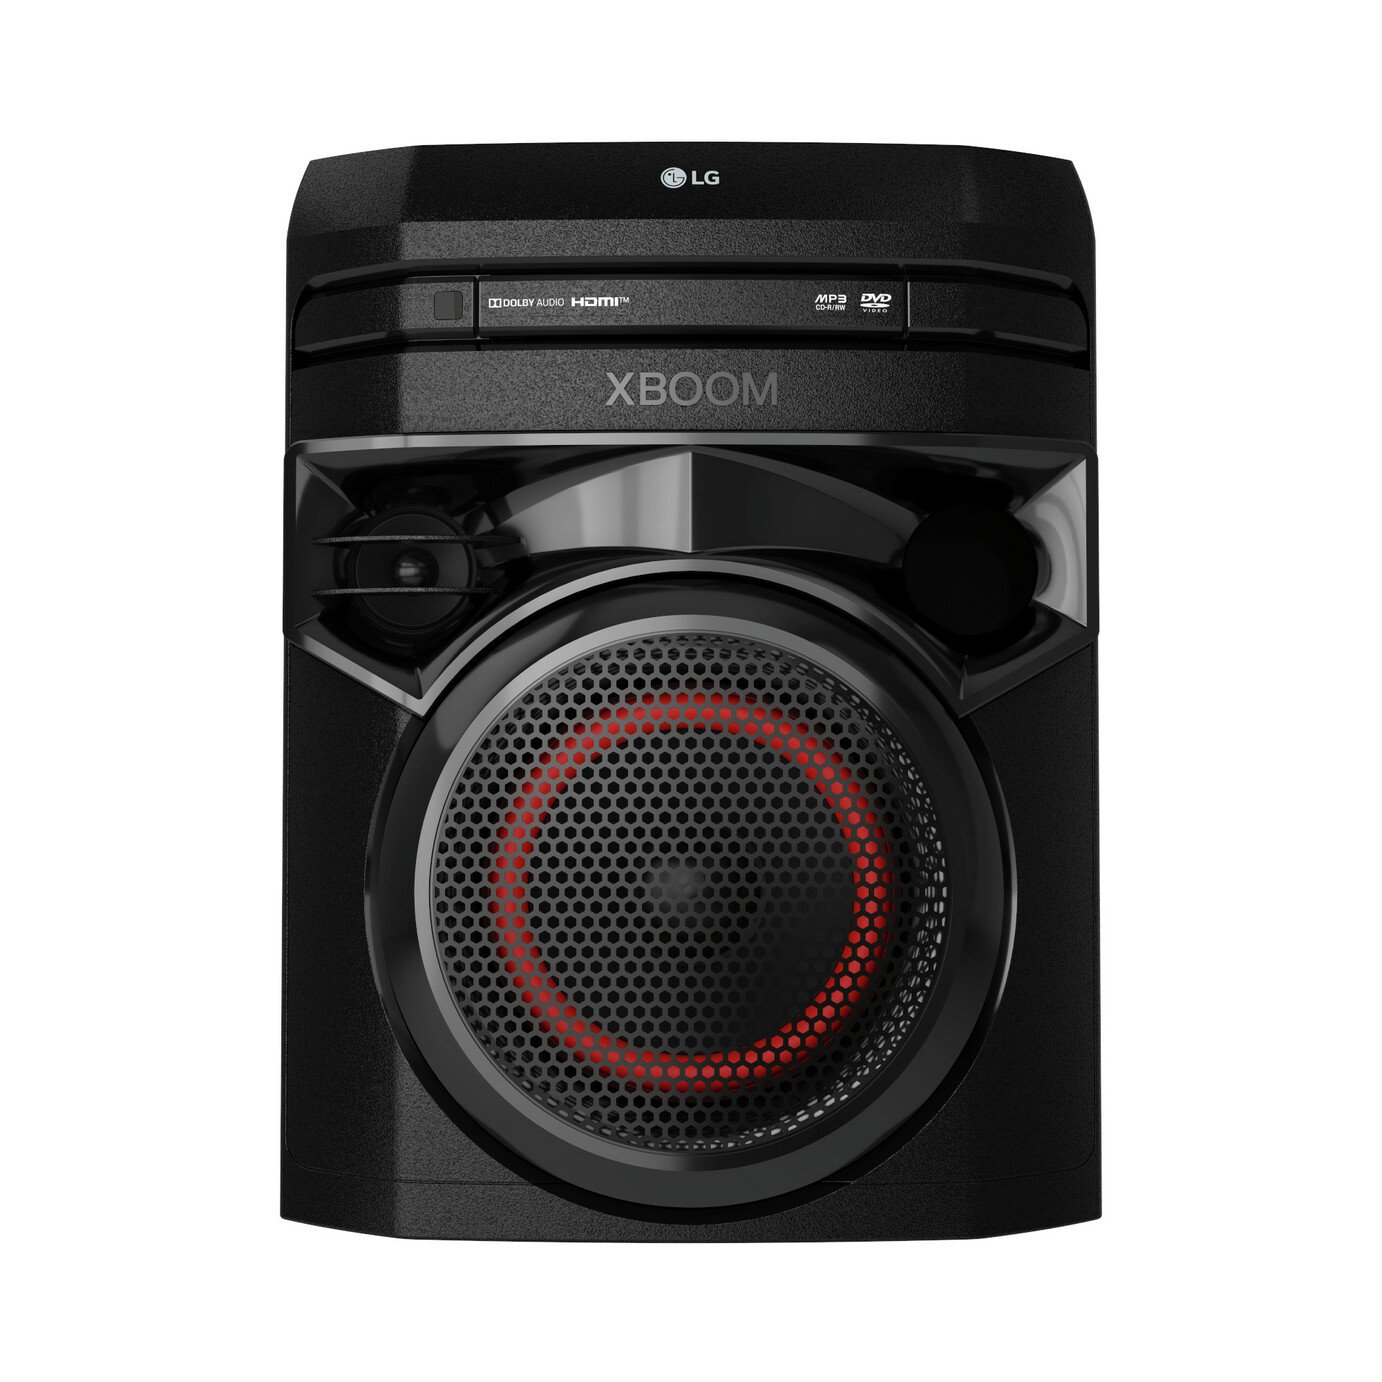 LG XBOOM ON2D Bluetooth Megasound Party Speaker Review